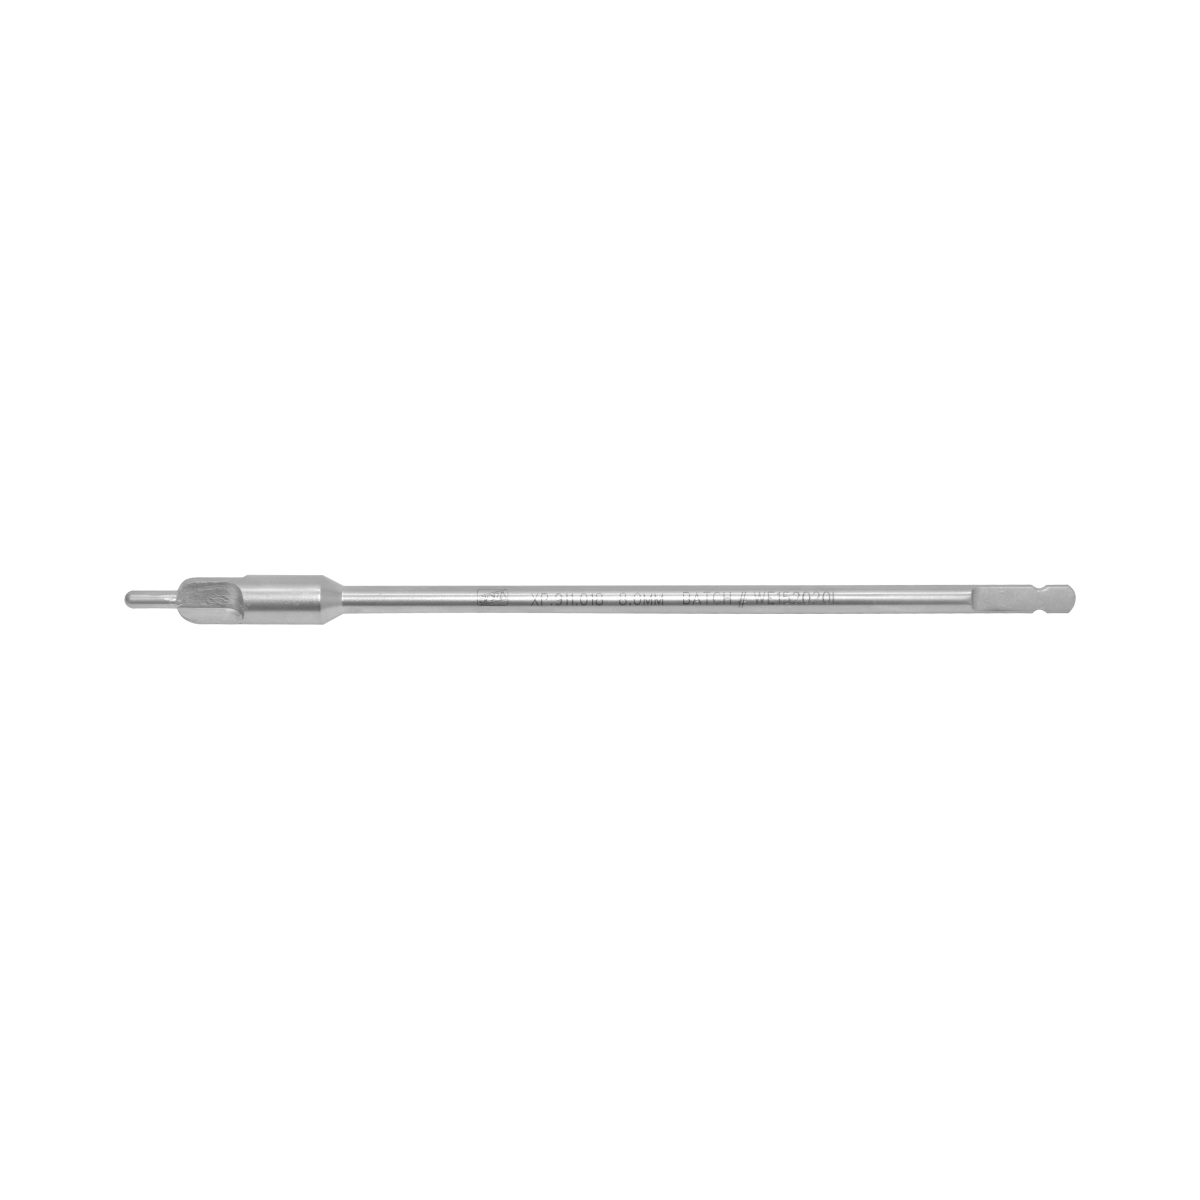 Counter Sink, Q.C. End 8.0mm Head (for 4.5/6.5mm Screws)